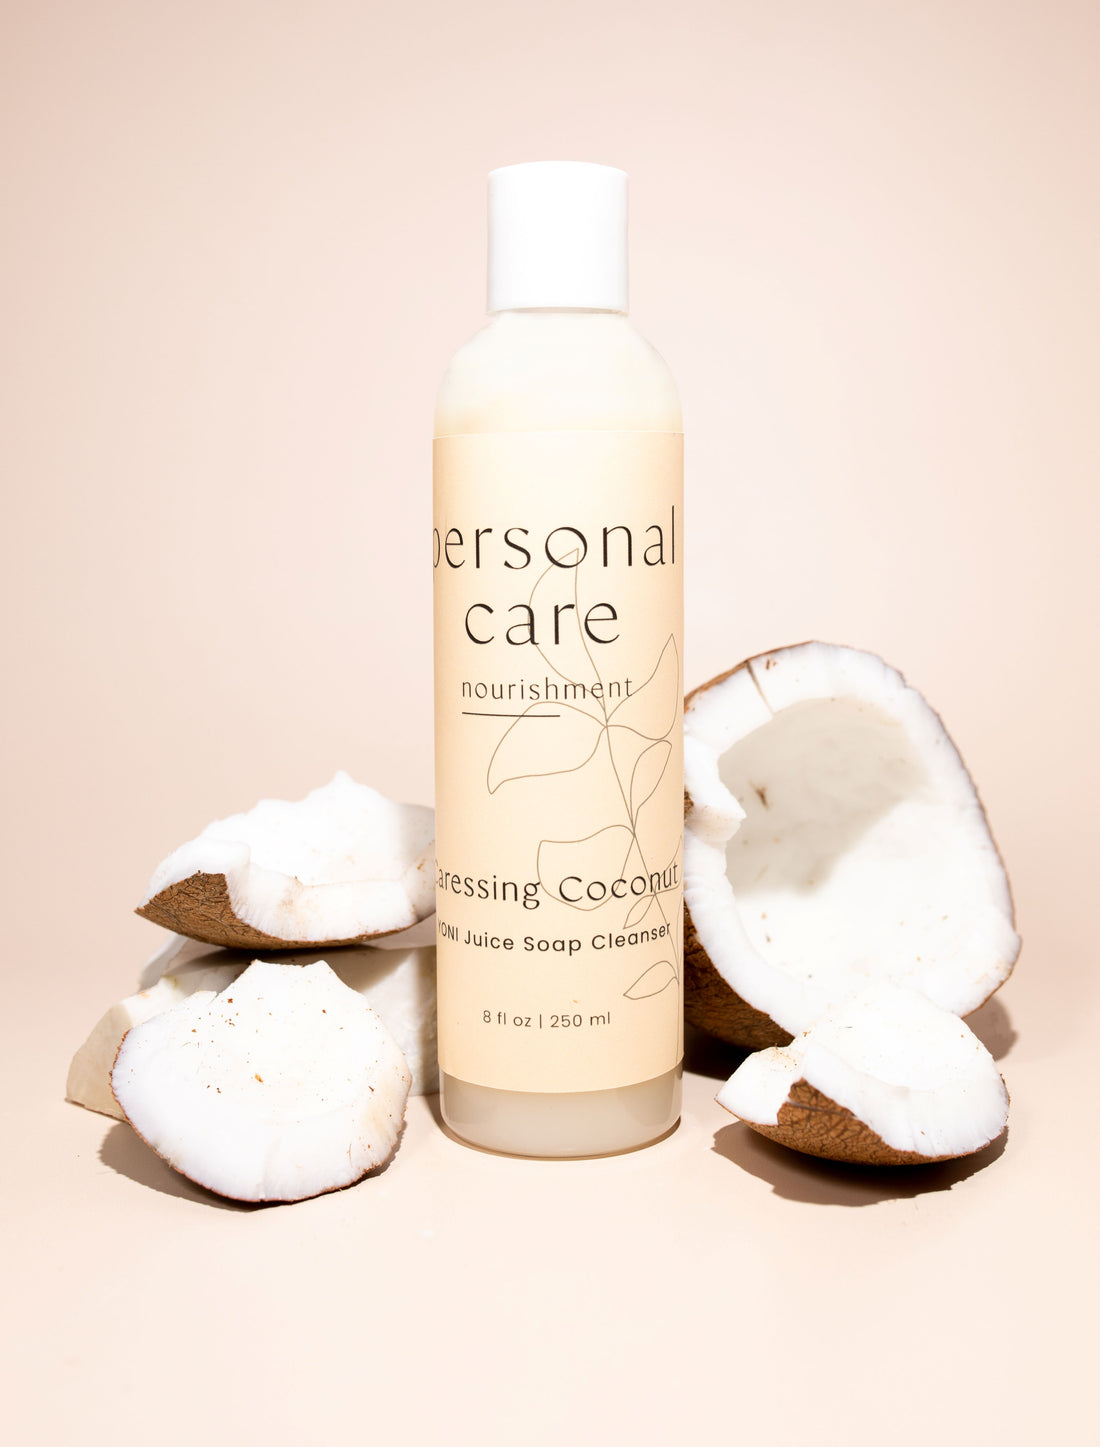 Caressing Coconut - YONI Juice Soap Cleanser